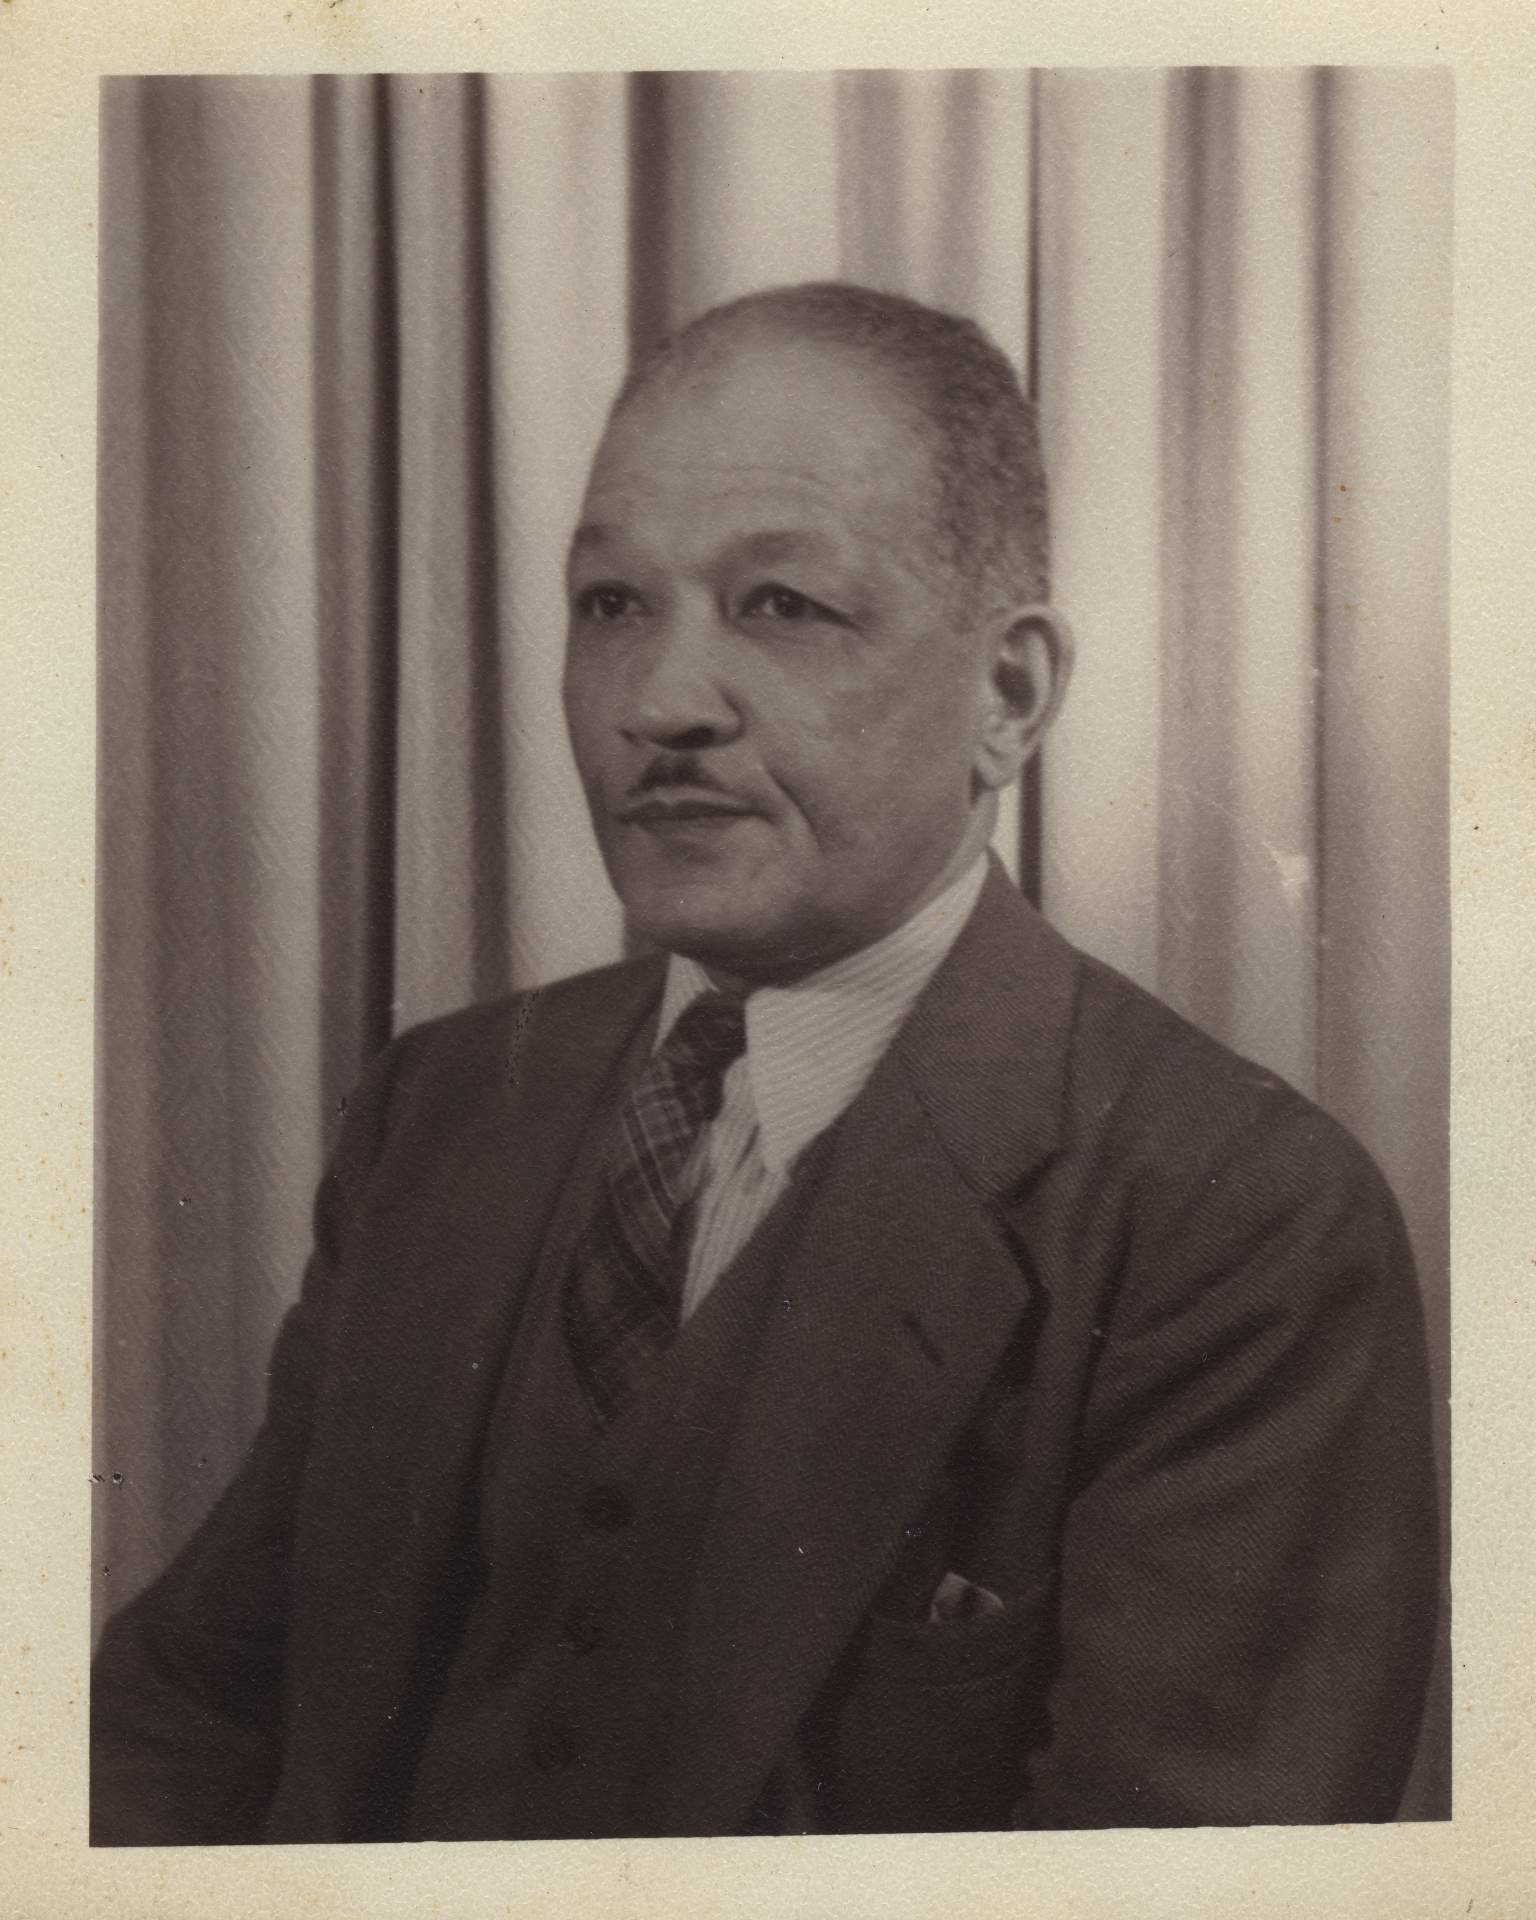 Through These Gates: Buffalo’s First African American Architect, John E. Brent